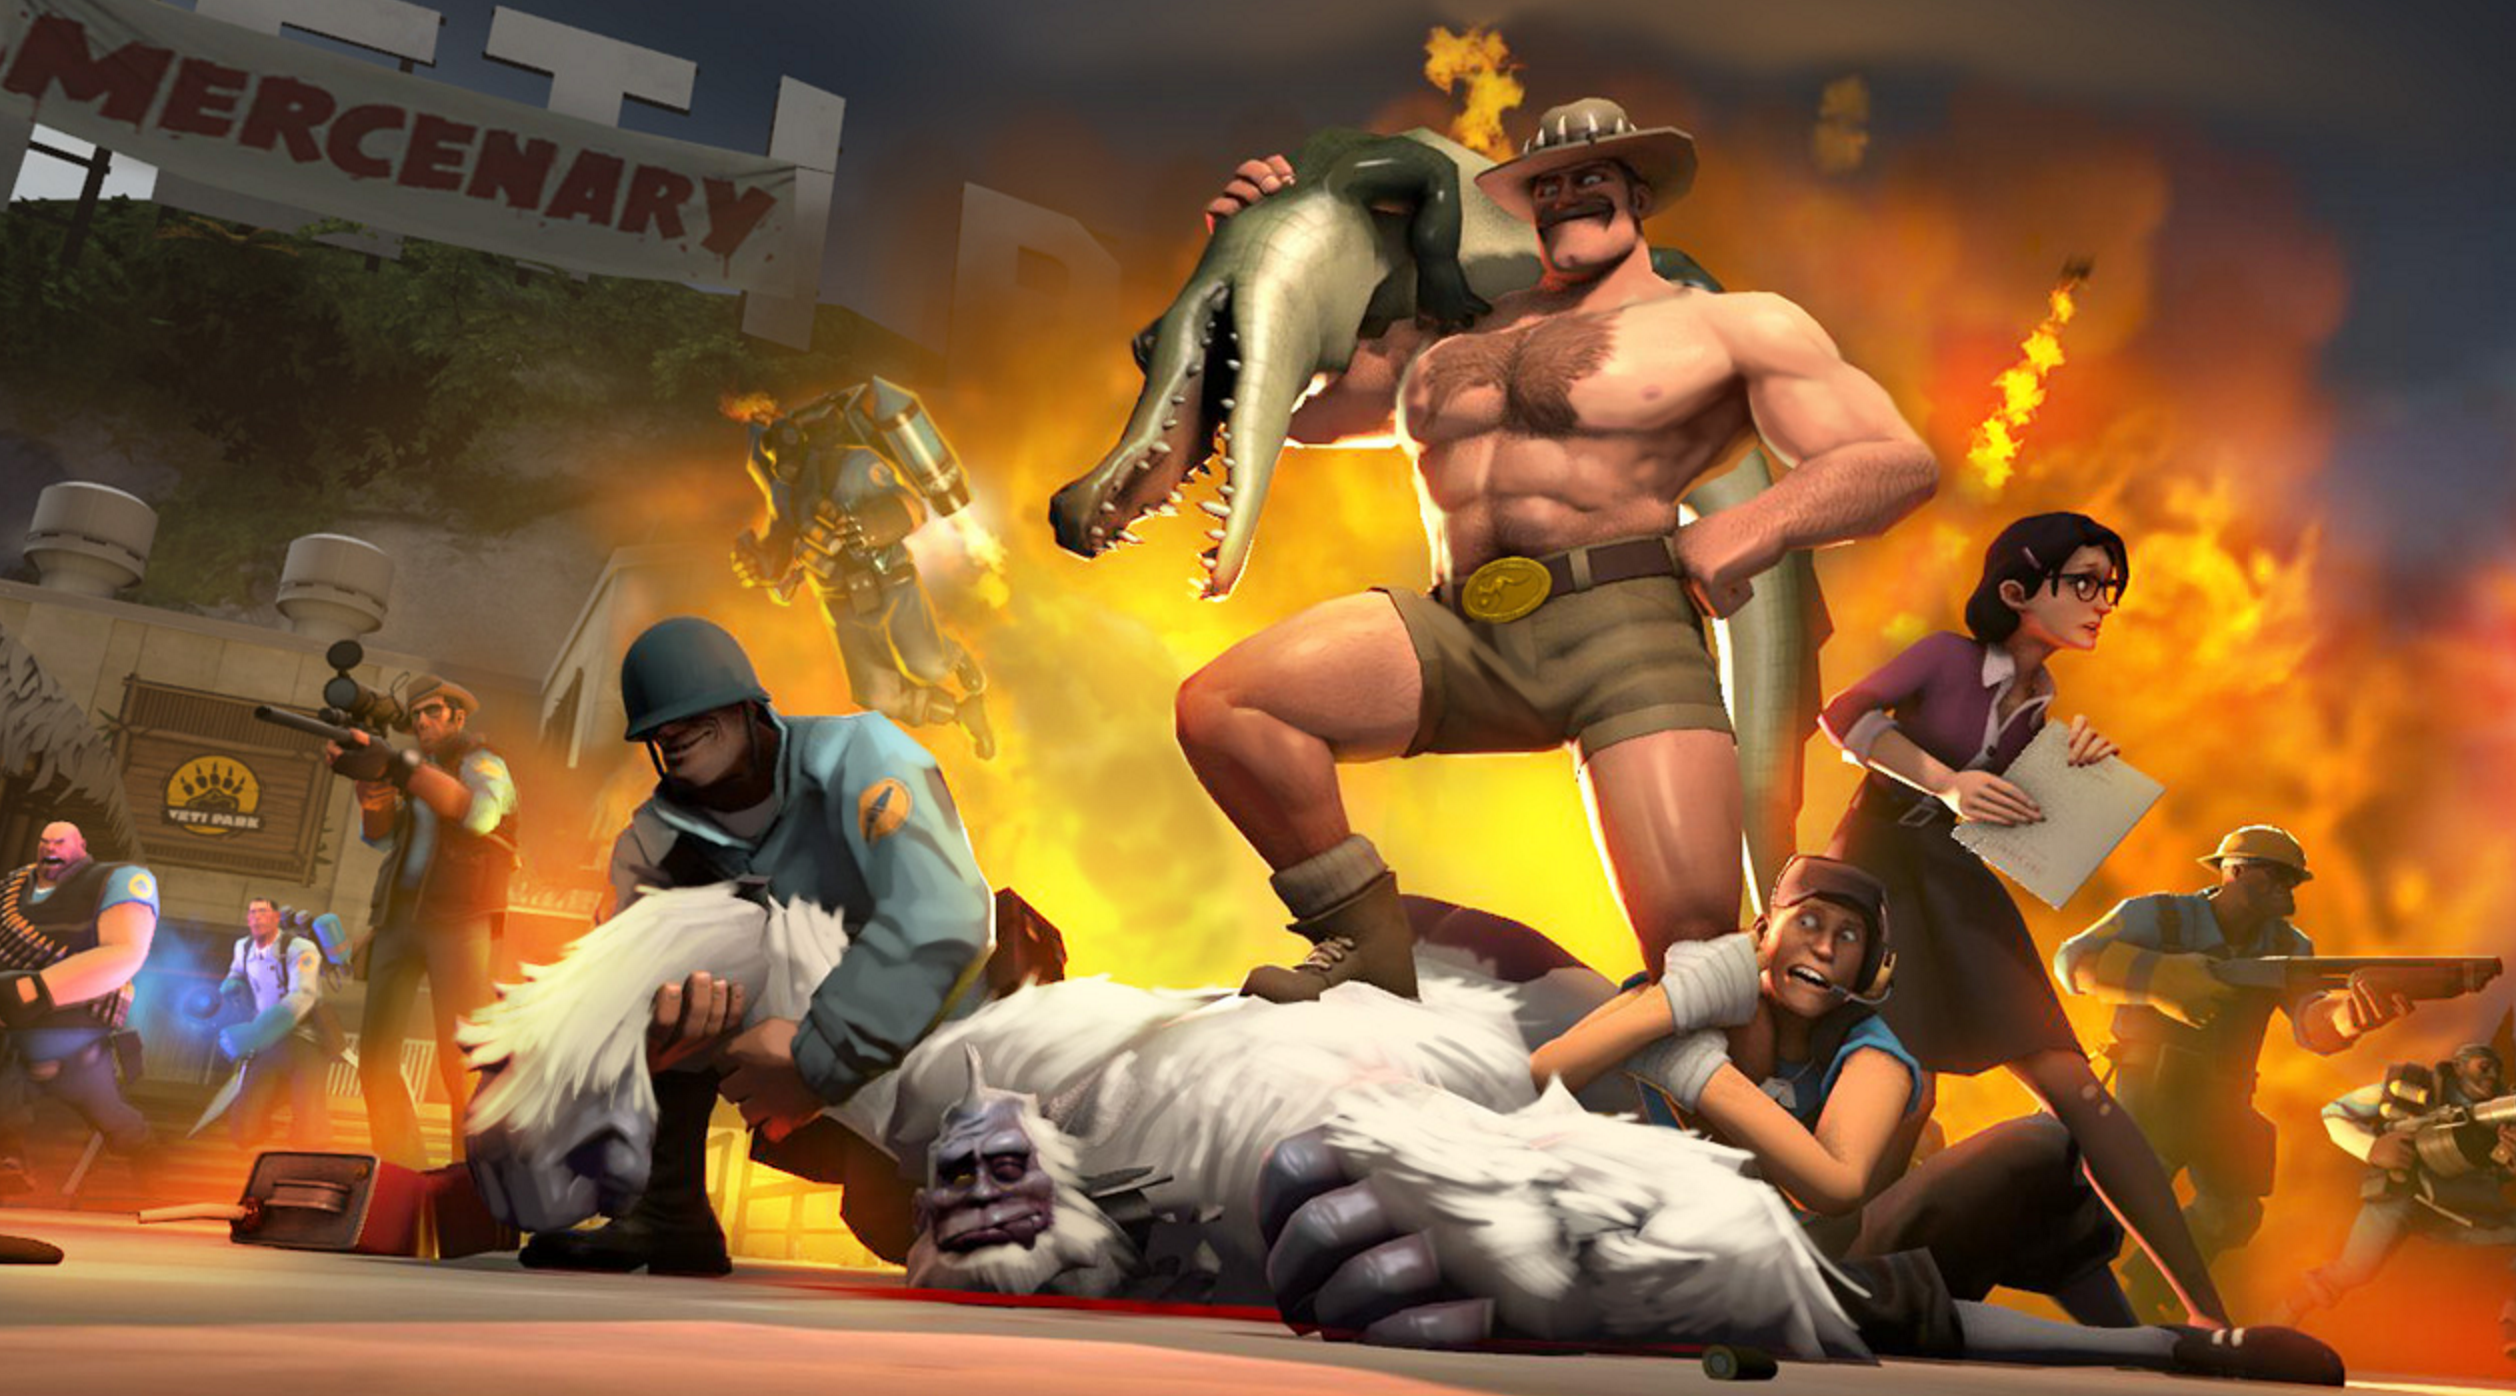 How the Team Fortress 2 community brought it back from the brink